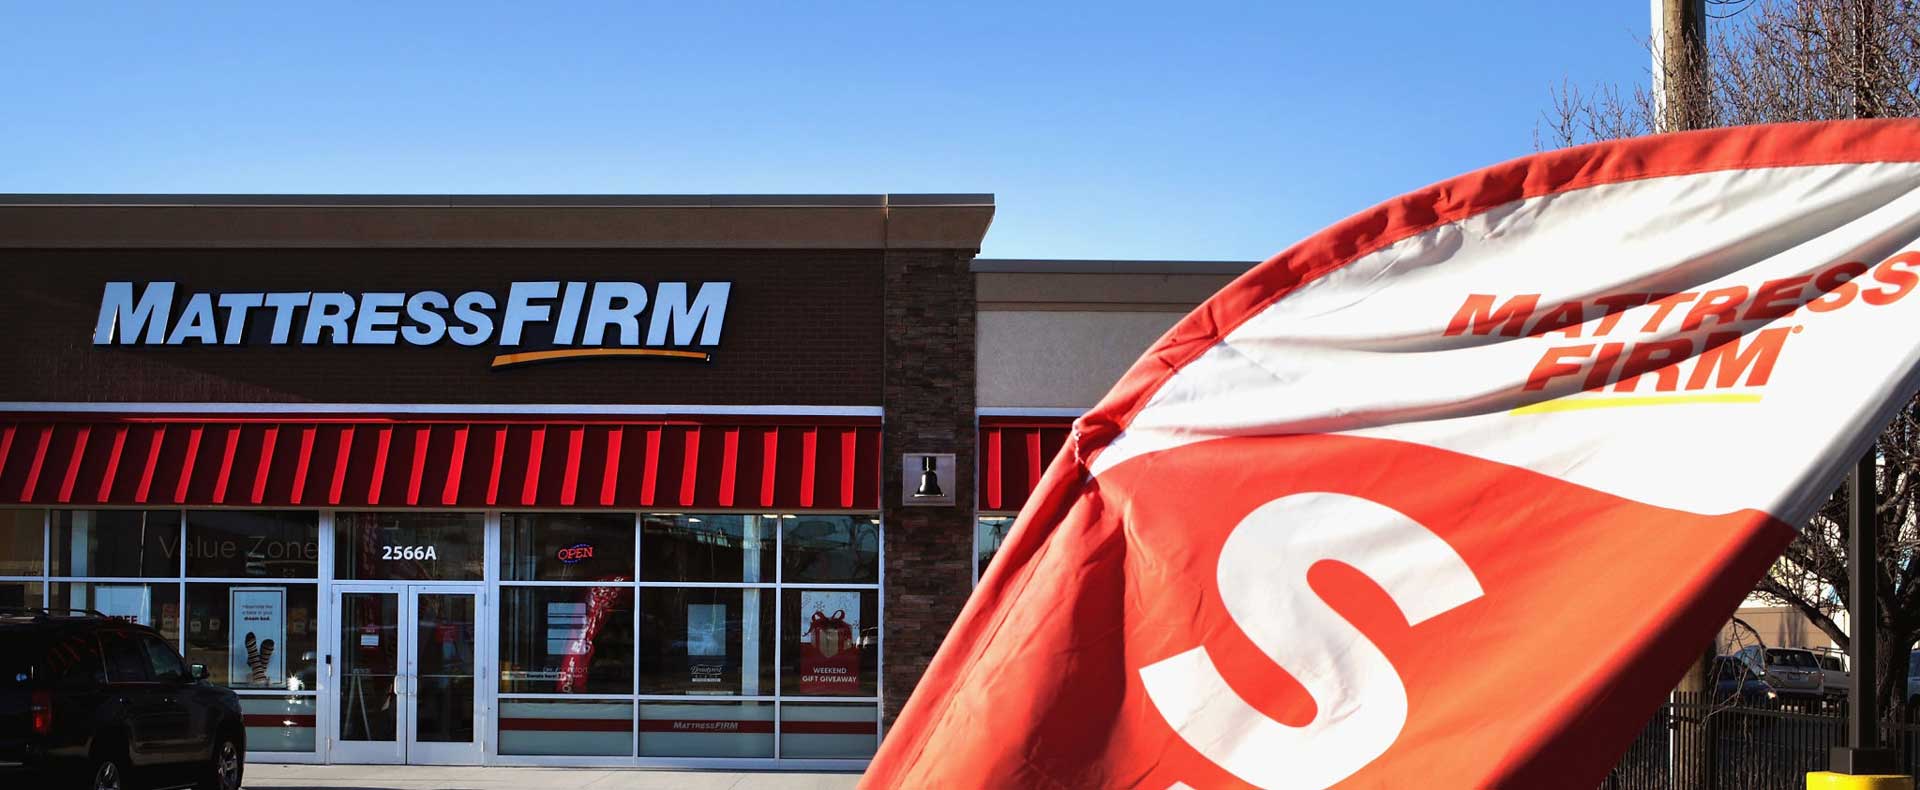 Mattress Firm Stores Near Me in Chicago